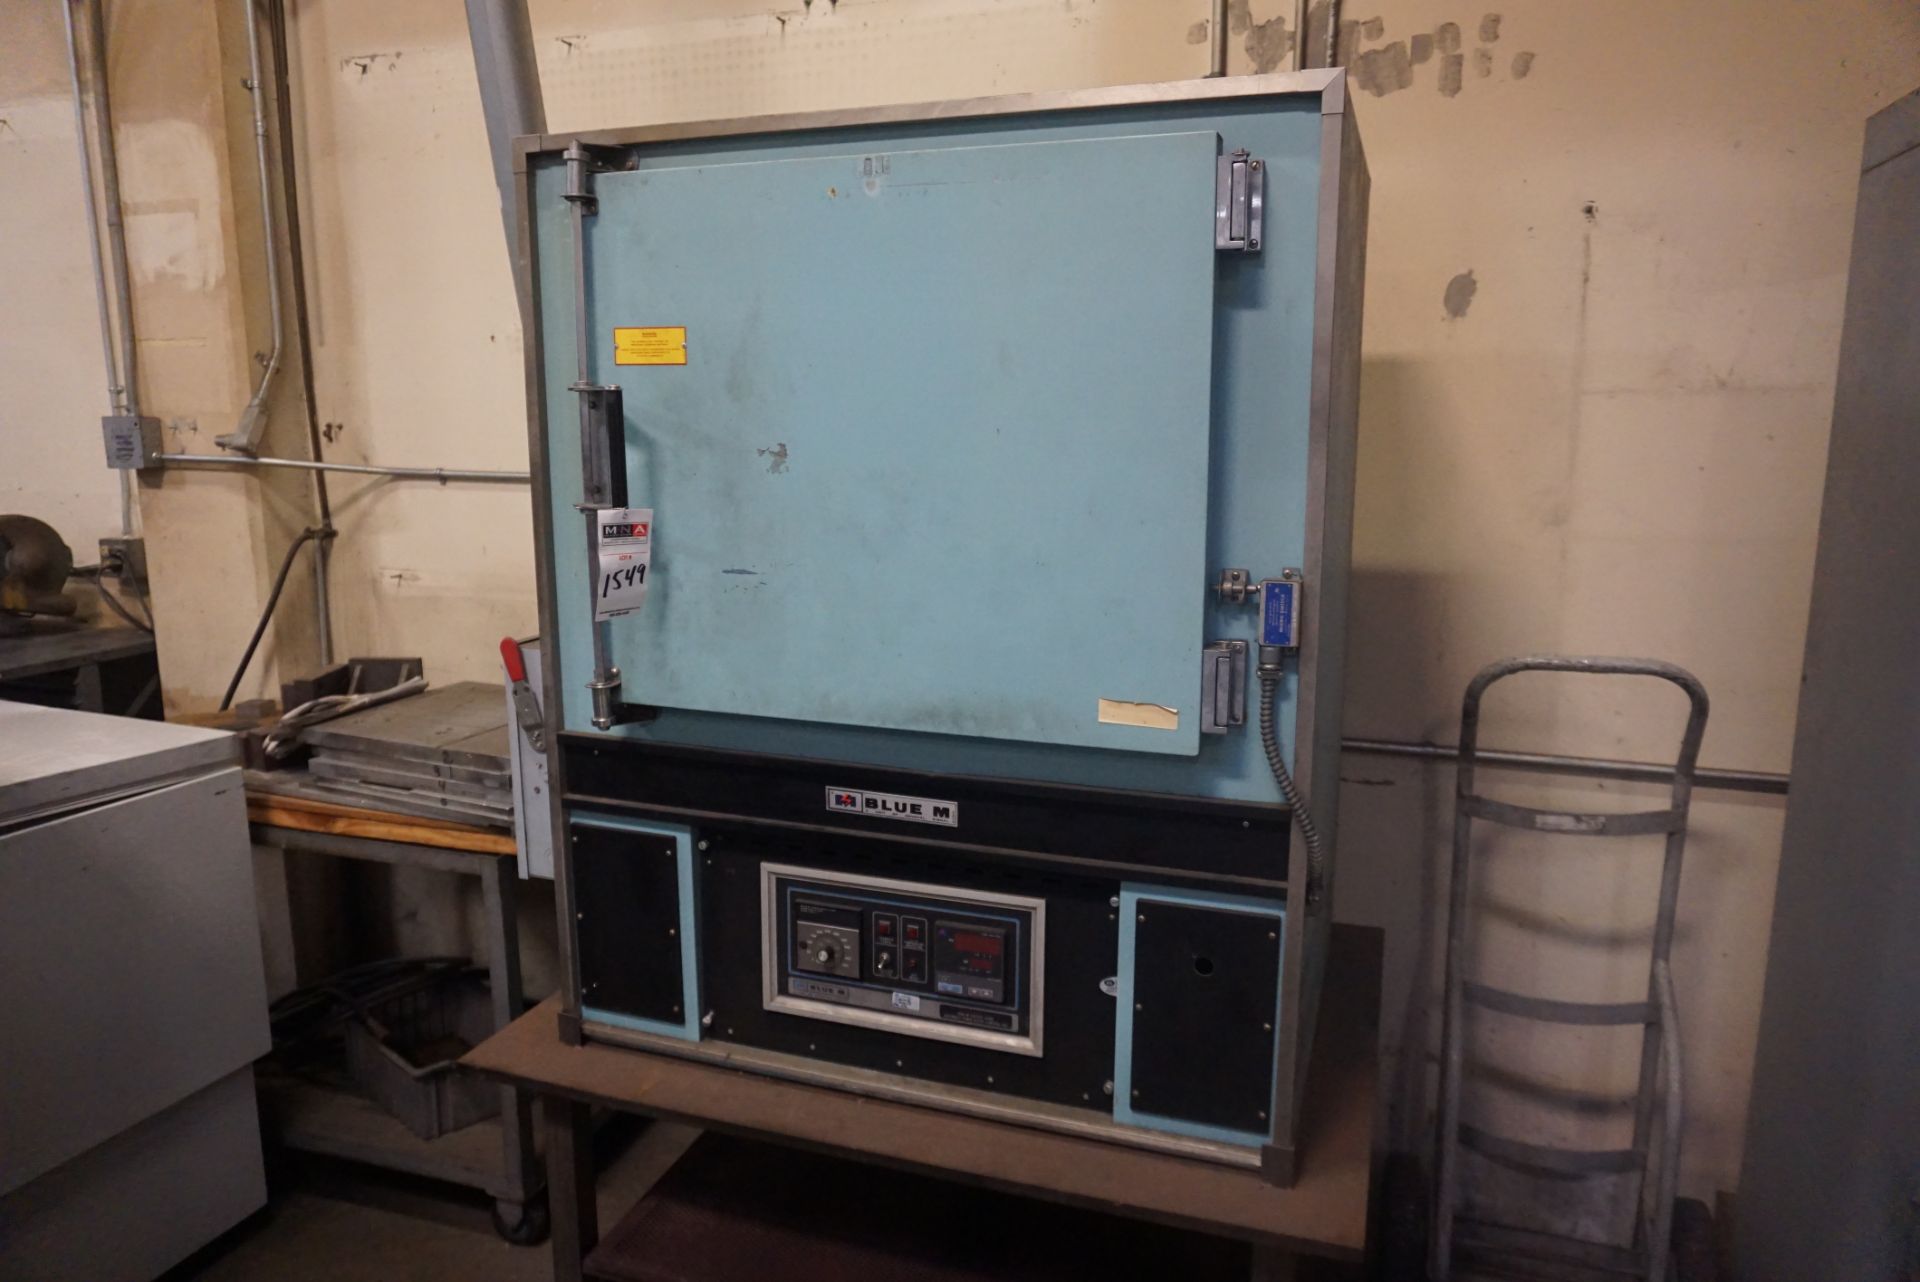 Blue M DC256C 650 Degree Max. Temp. Convection Oven, s/n DC3476 - Image 4 of 5